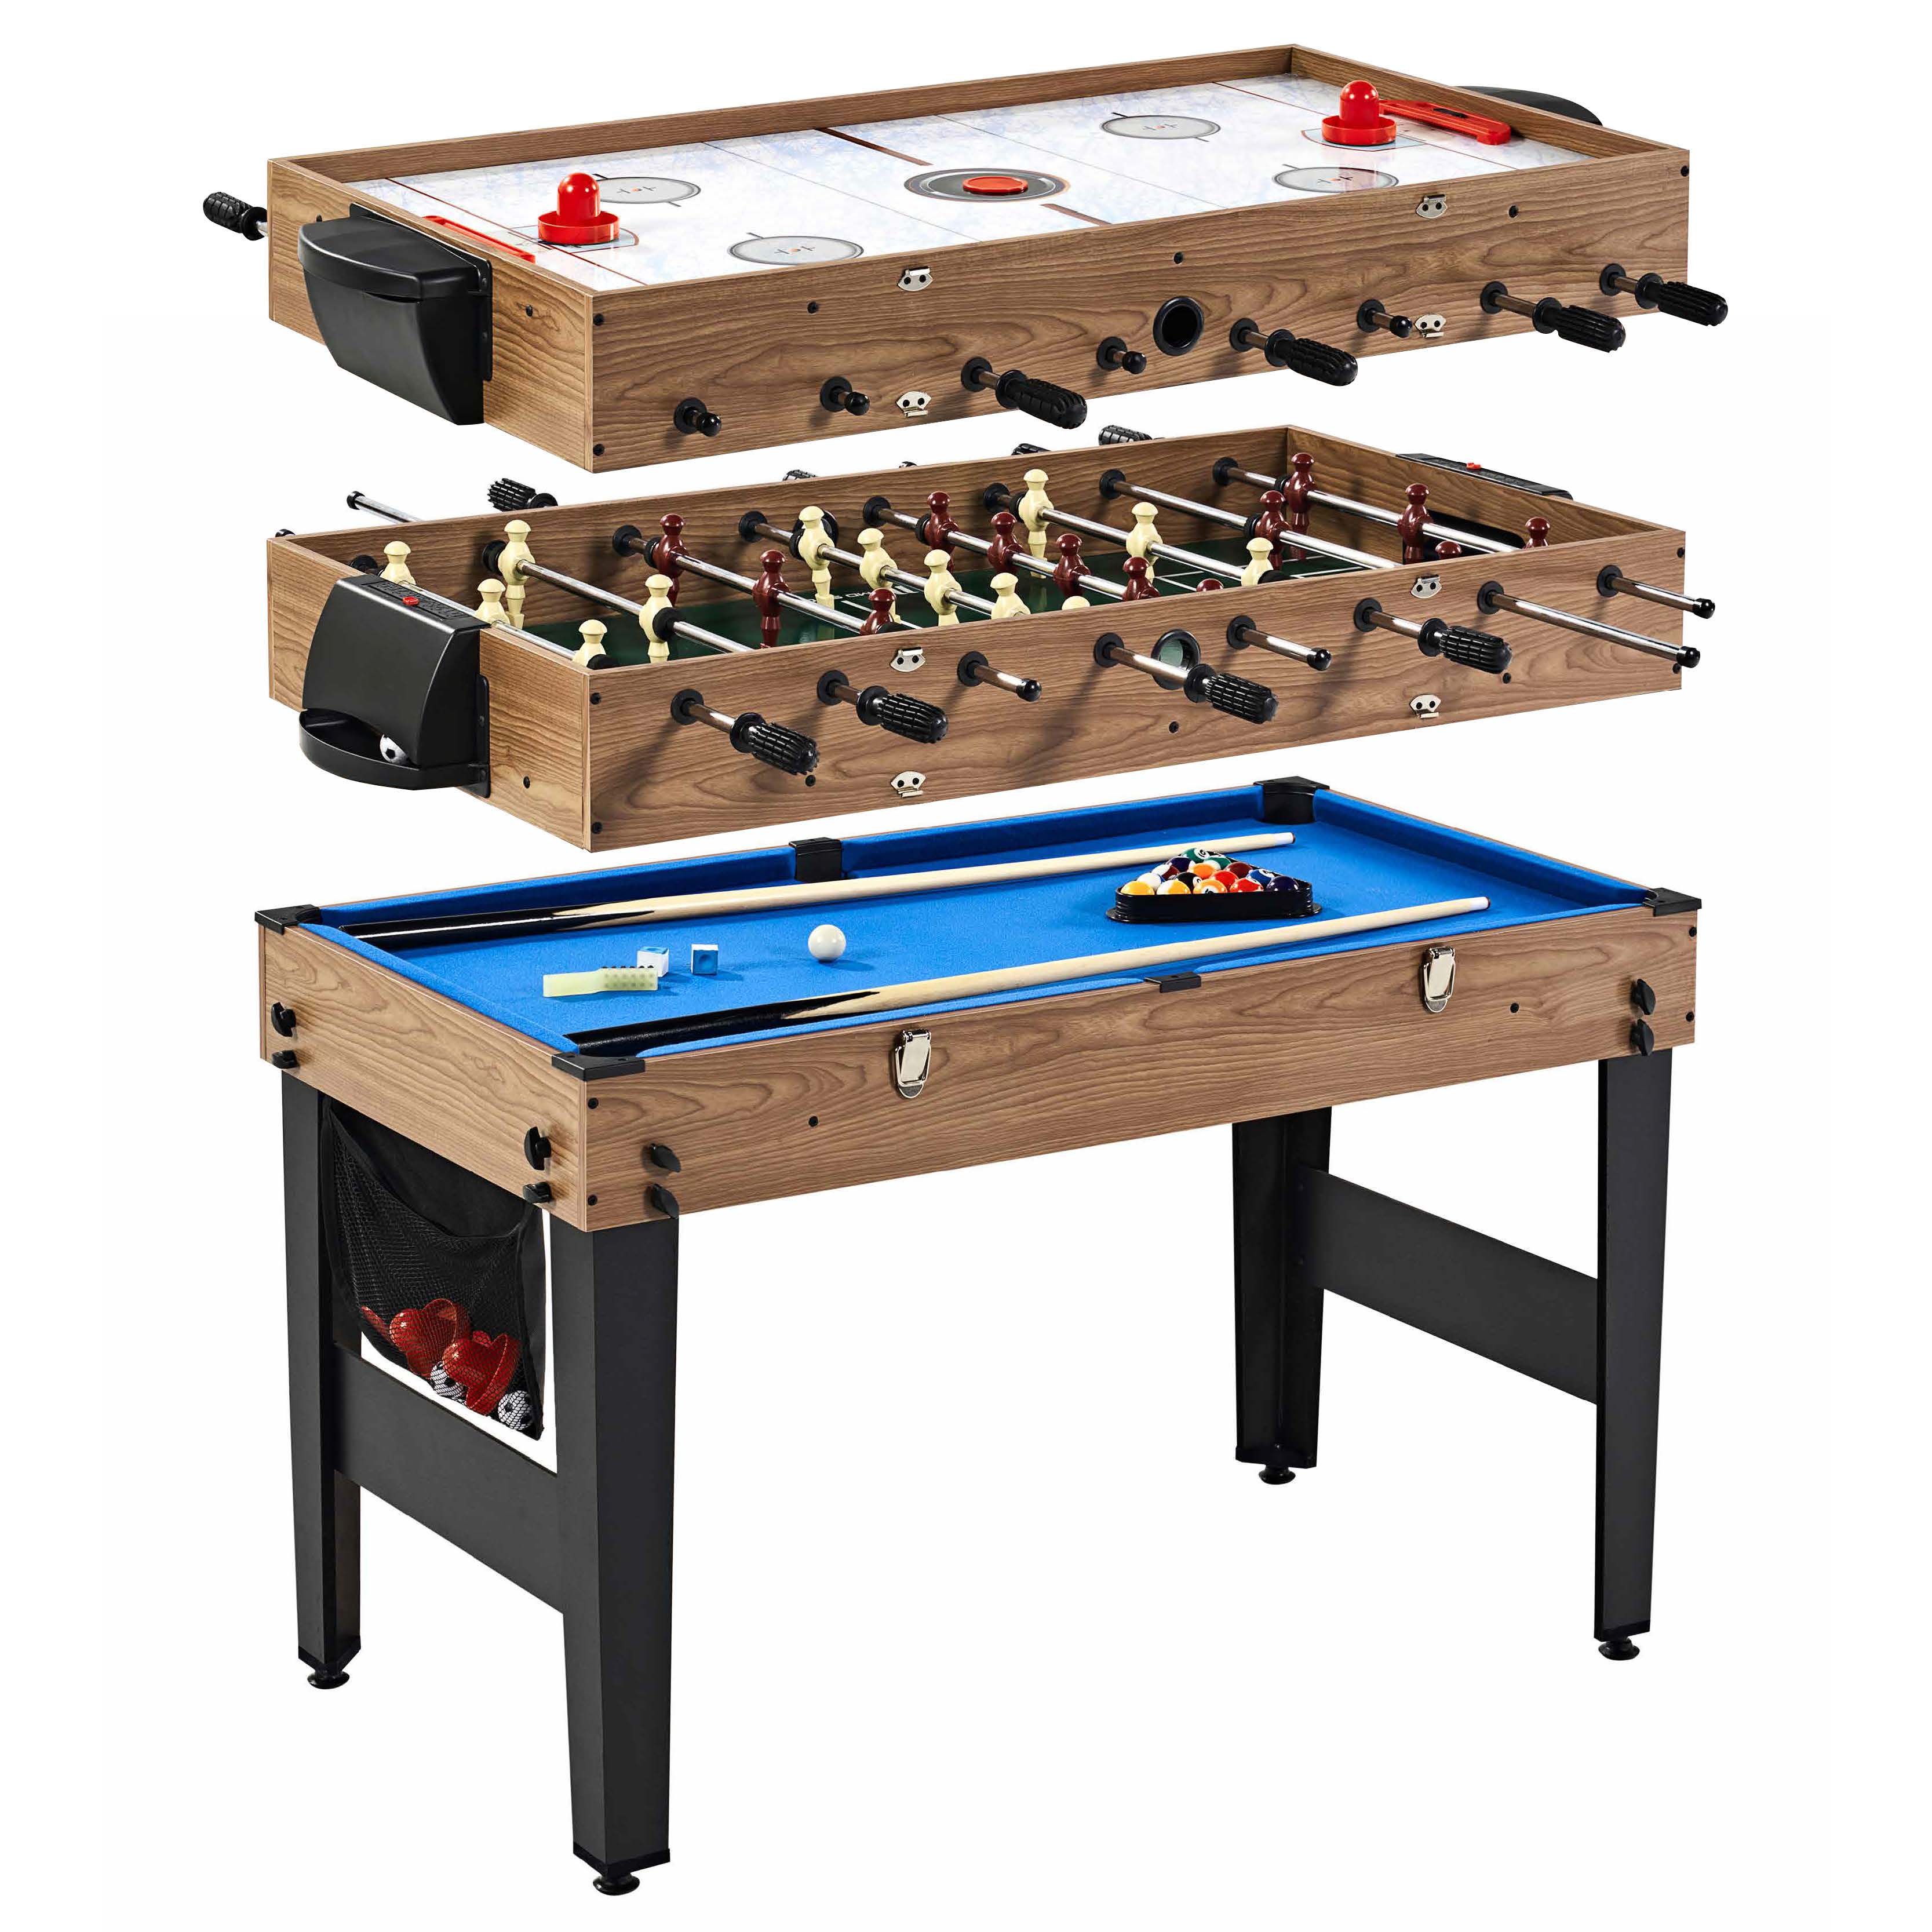 MD Sports 48" 3 In 1 Combo Game Table, Pool, Hockey, Foosball, Accessories Included - image 1 of 10